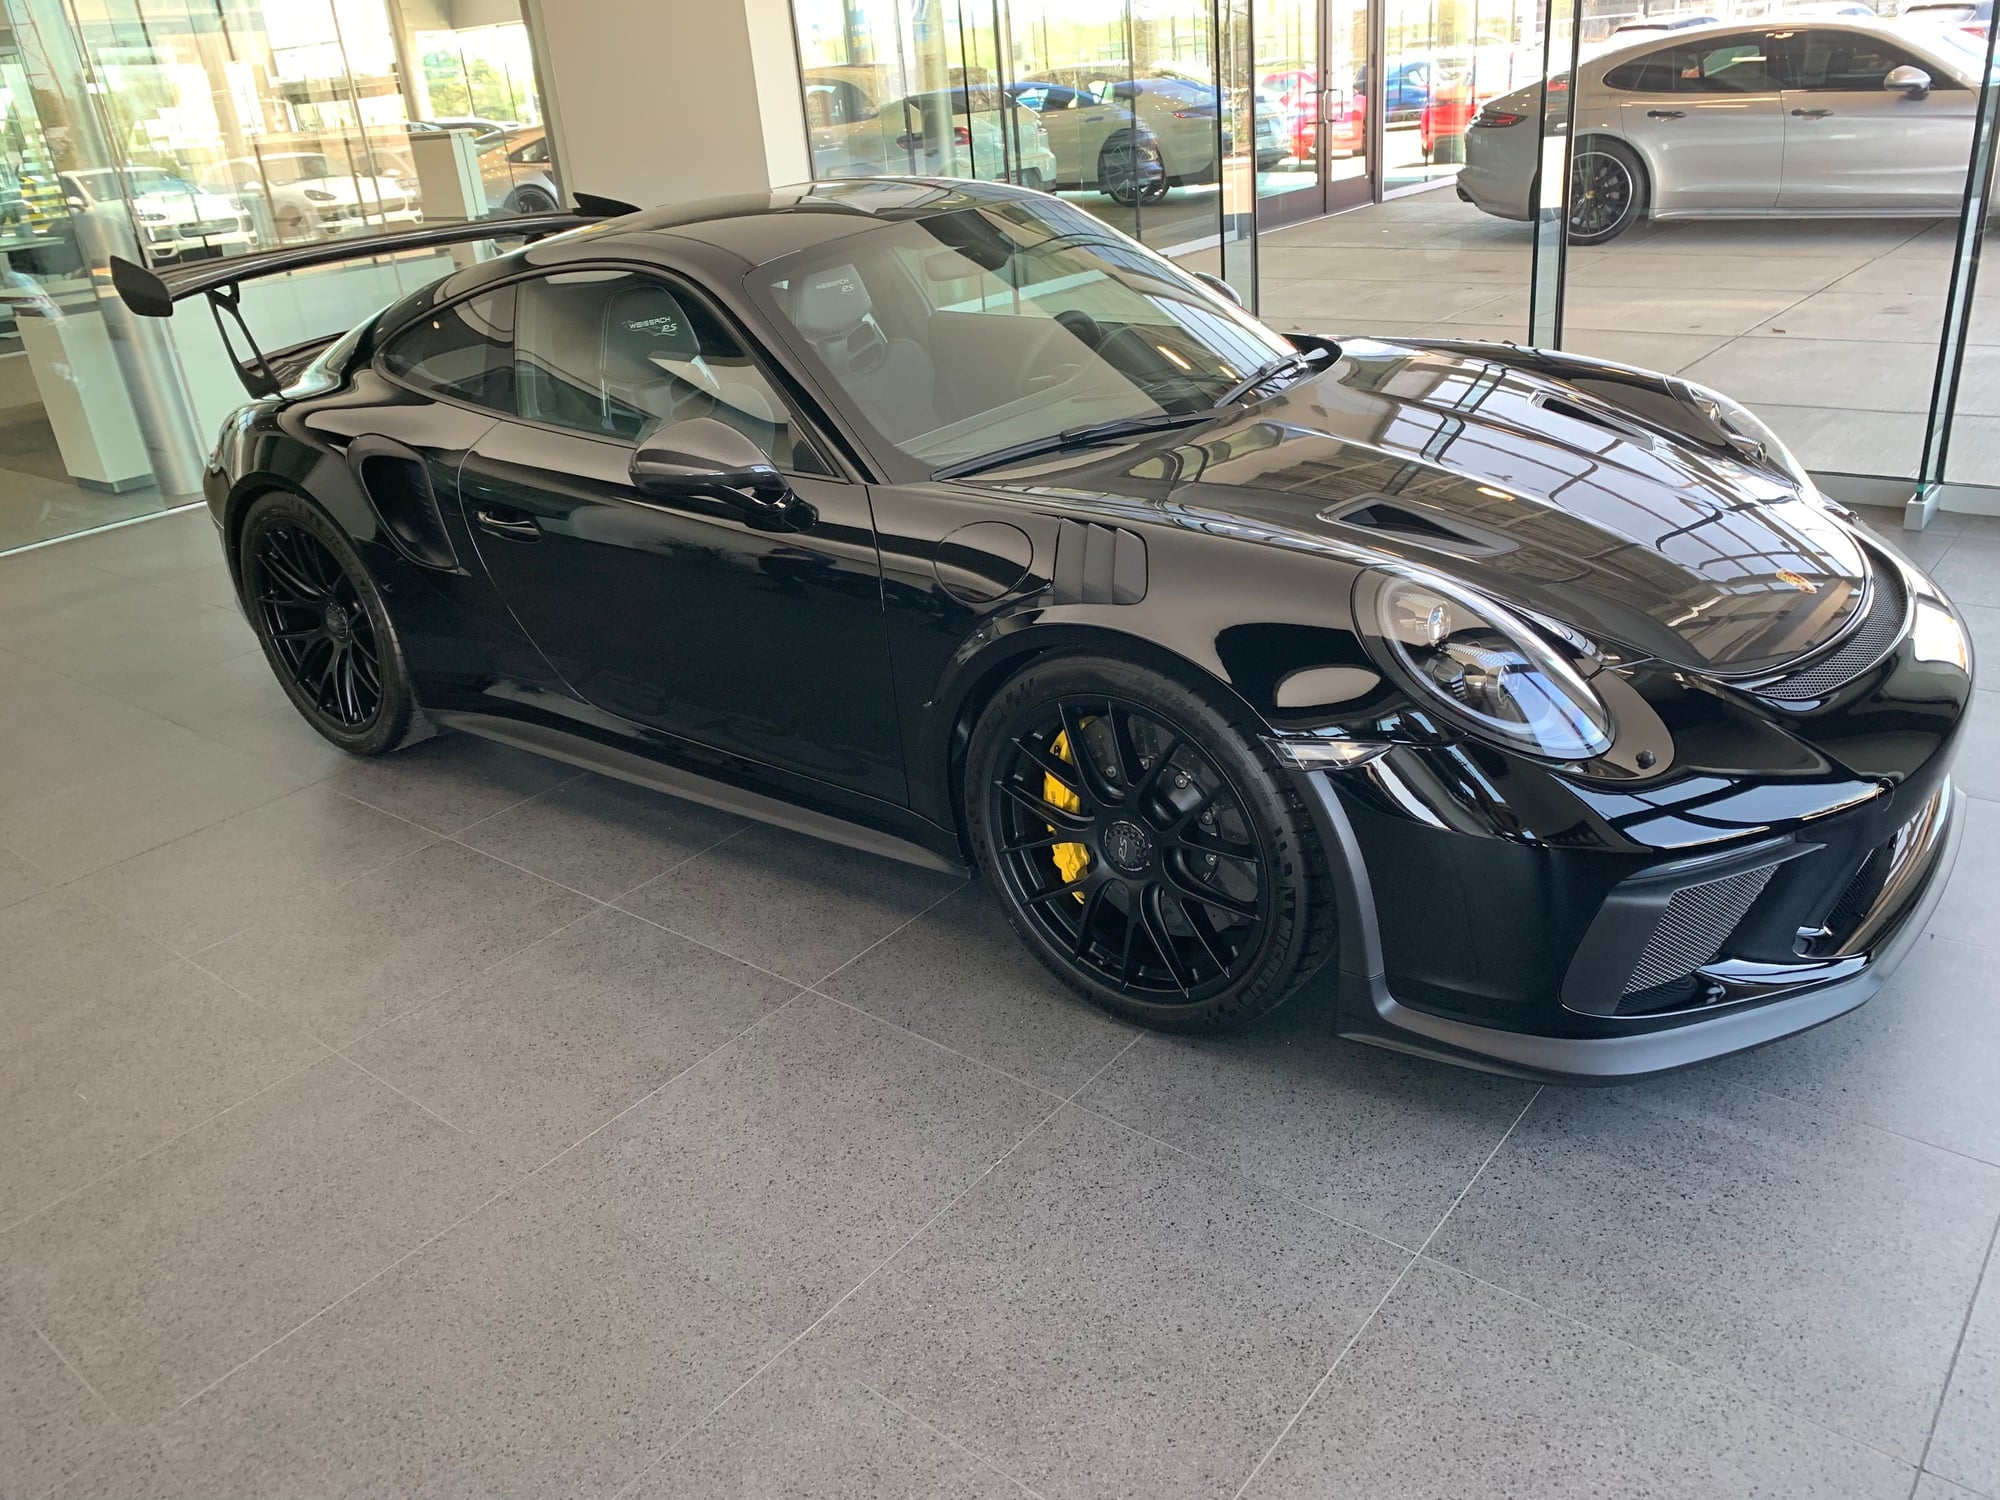 2019 Porsche GT3 - 2019 GT3RS in NEW condition, WP, MAG wheels - Used - VIN WP0AF2A97KS165661 - 1,040 Miles - 6 cyl - 2WD - Automatic - Coupe - Black - Springfield, IL 62711, United States